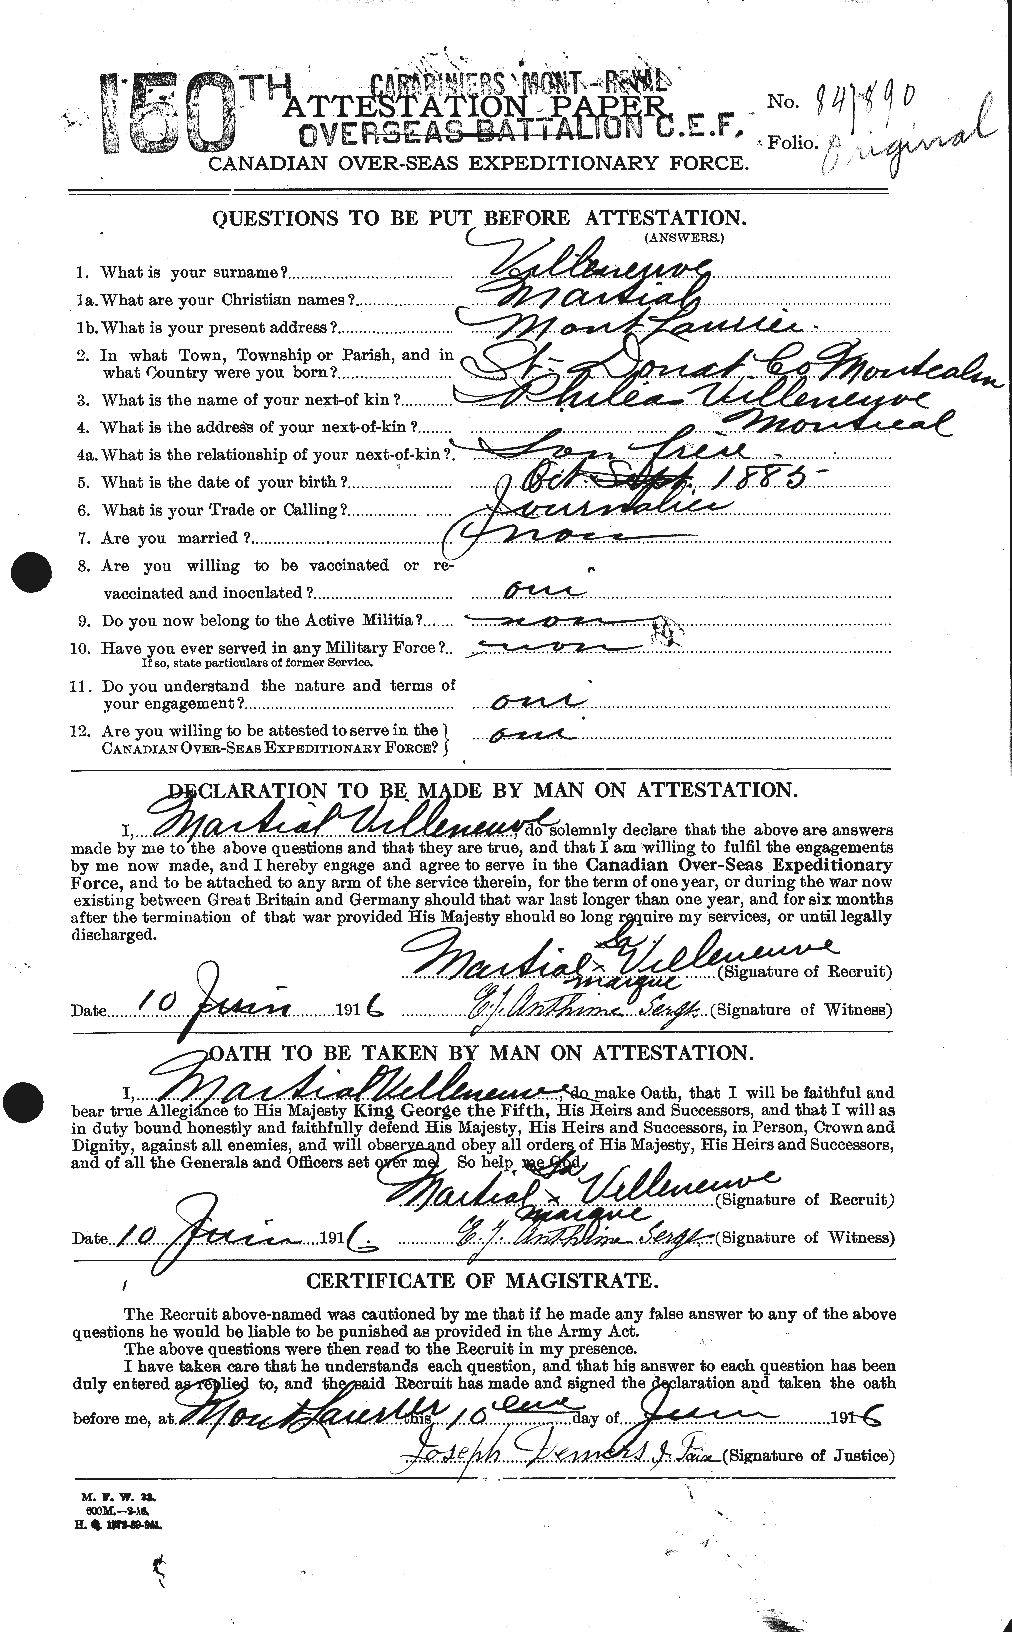 Personnel Records of the First World War - CEF 653864a